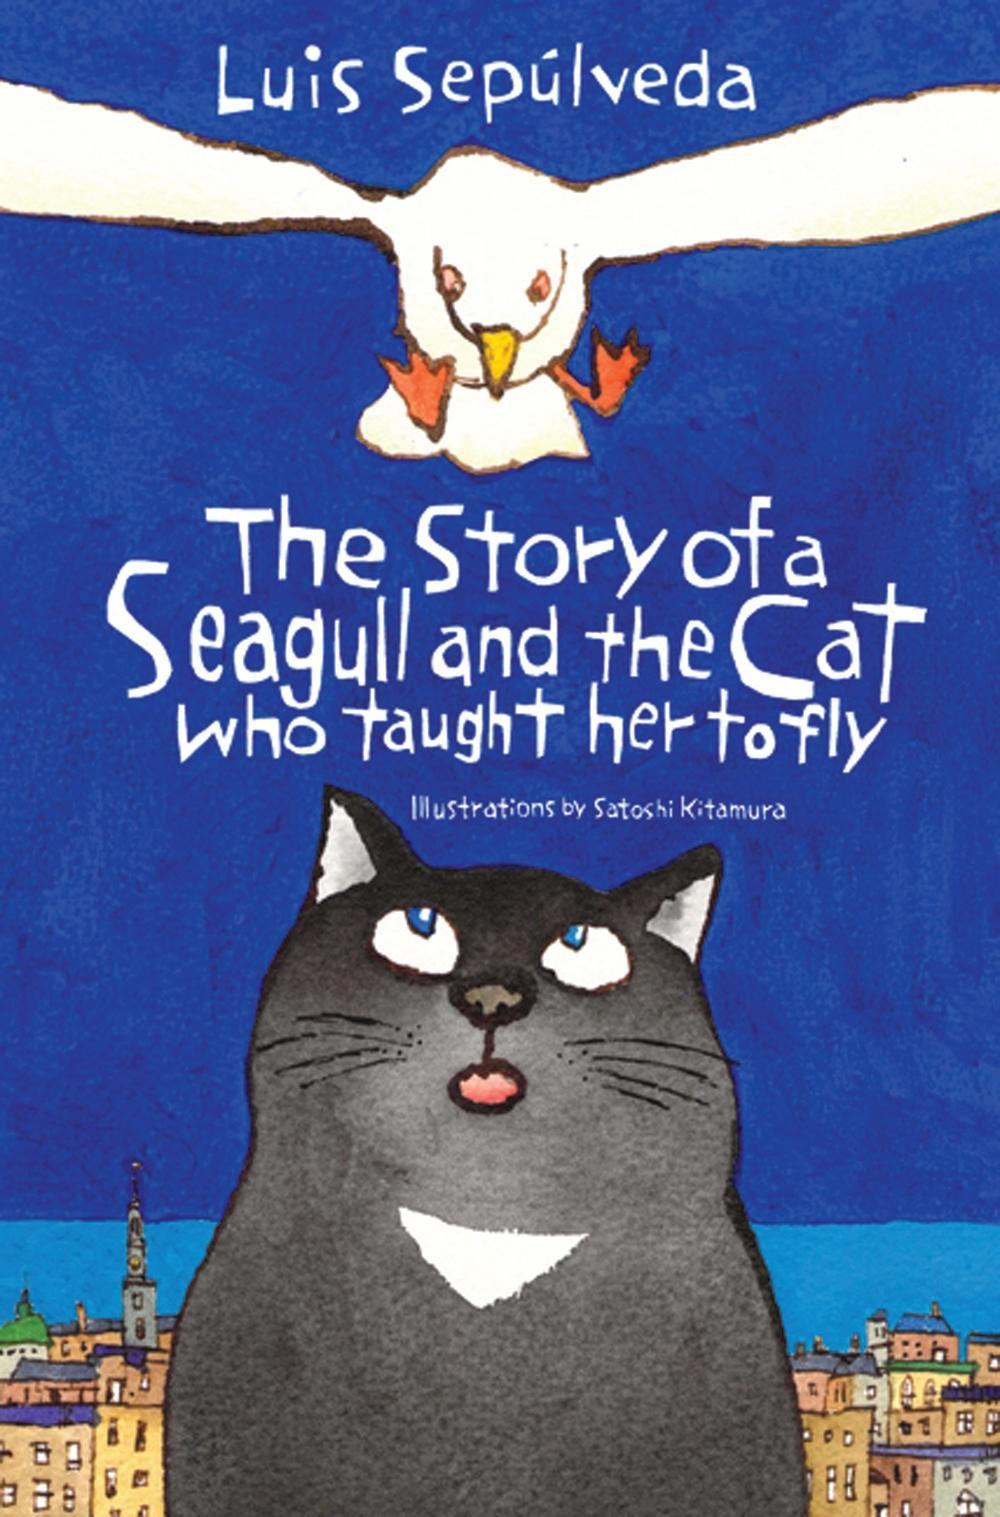 Story of a Seagull and the Cat Who Taught Her to Fly - Luis Sepulveda